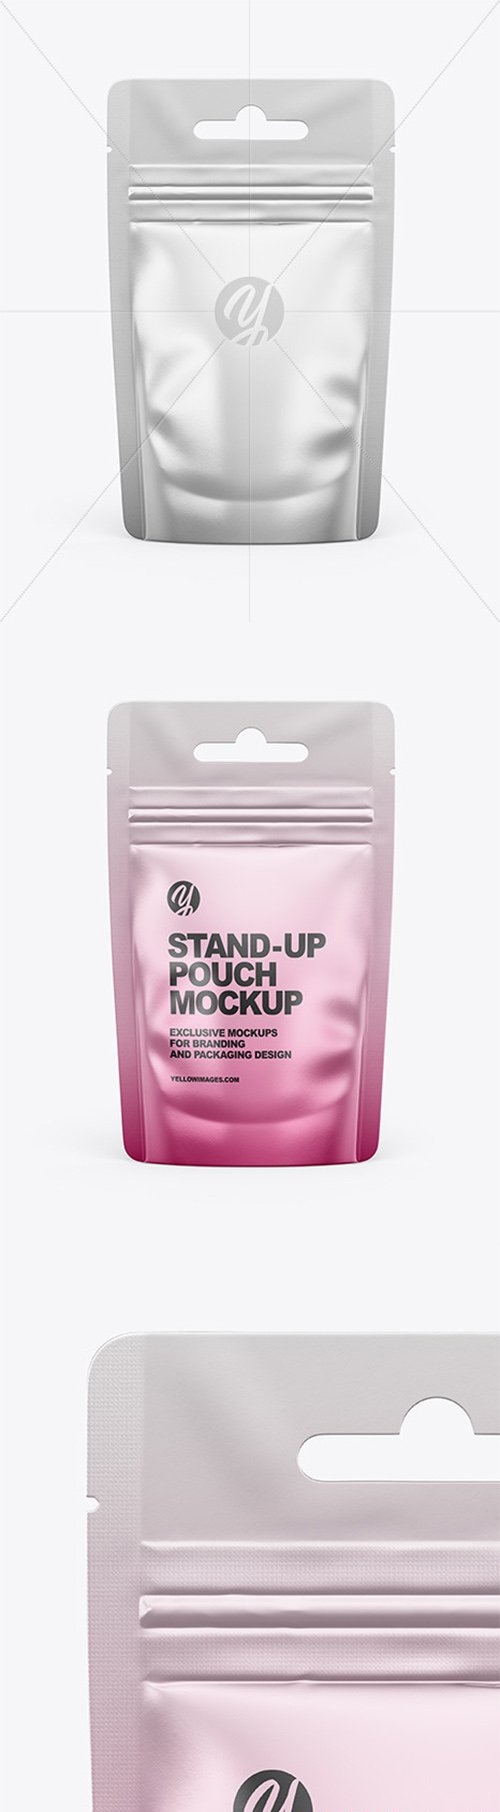 Metallic Stand-Up Pouch Mockup 66540